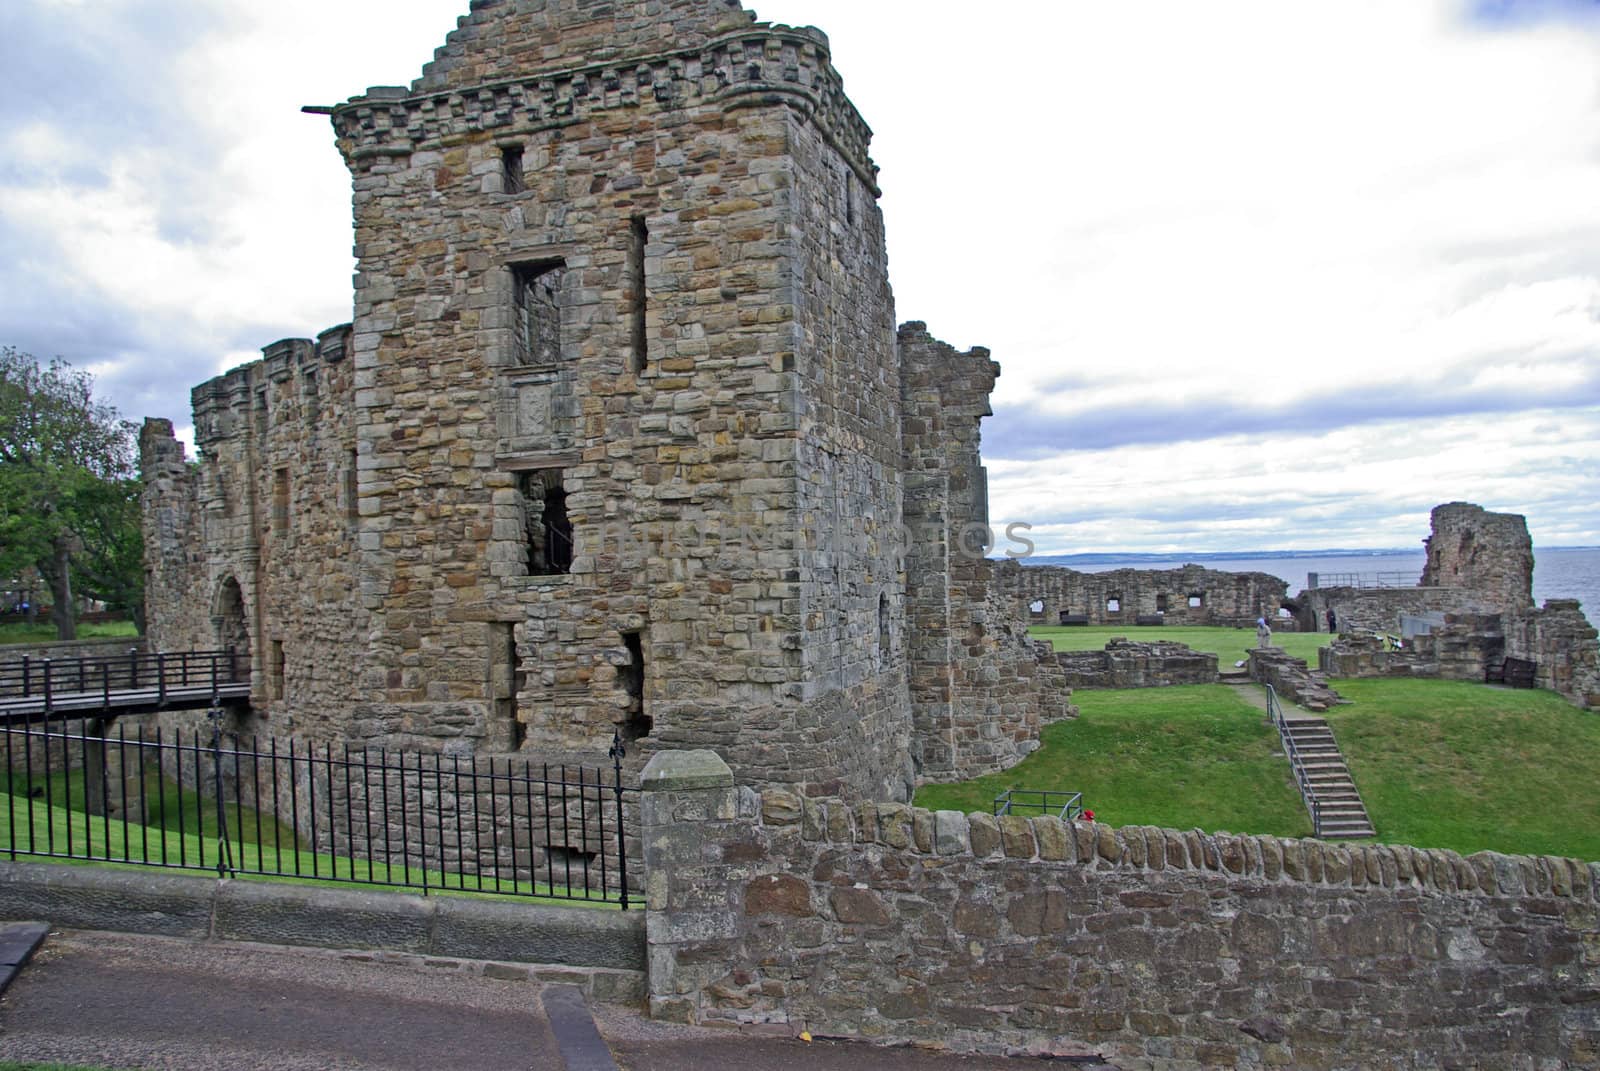 The ruins of St Andrews Castle